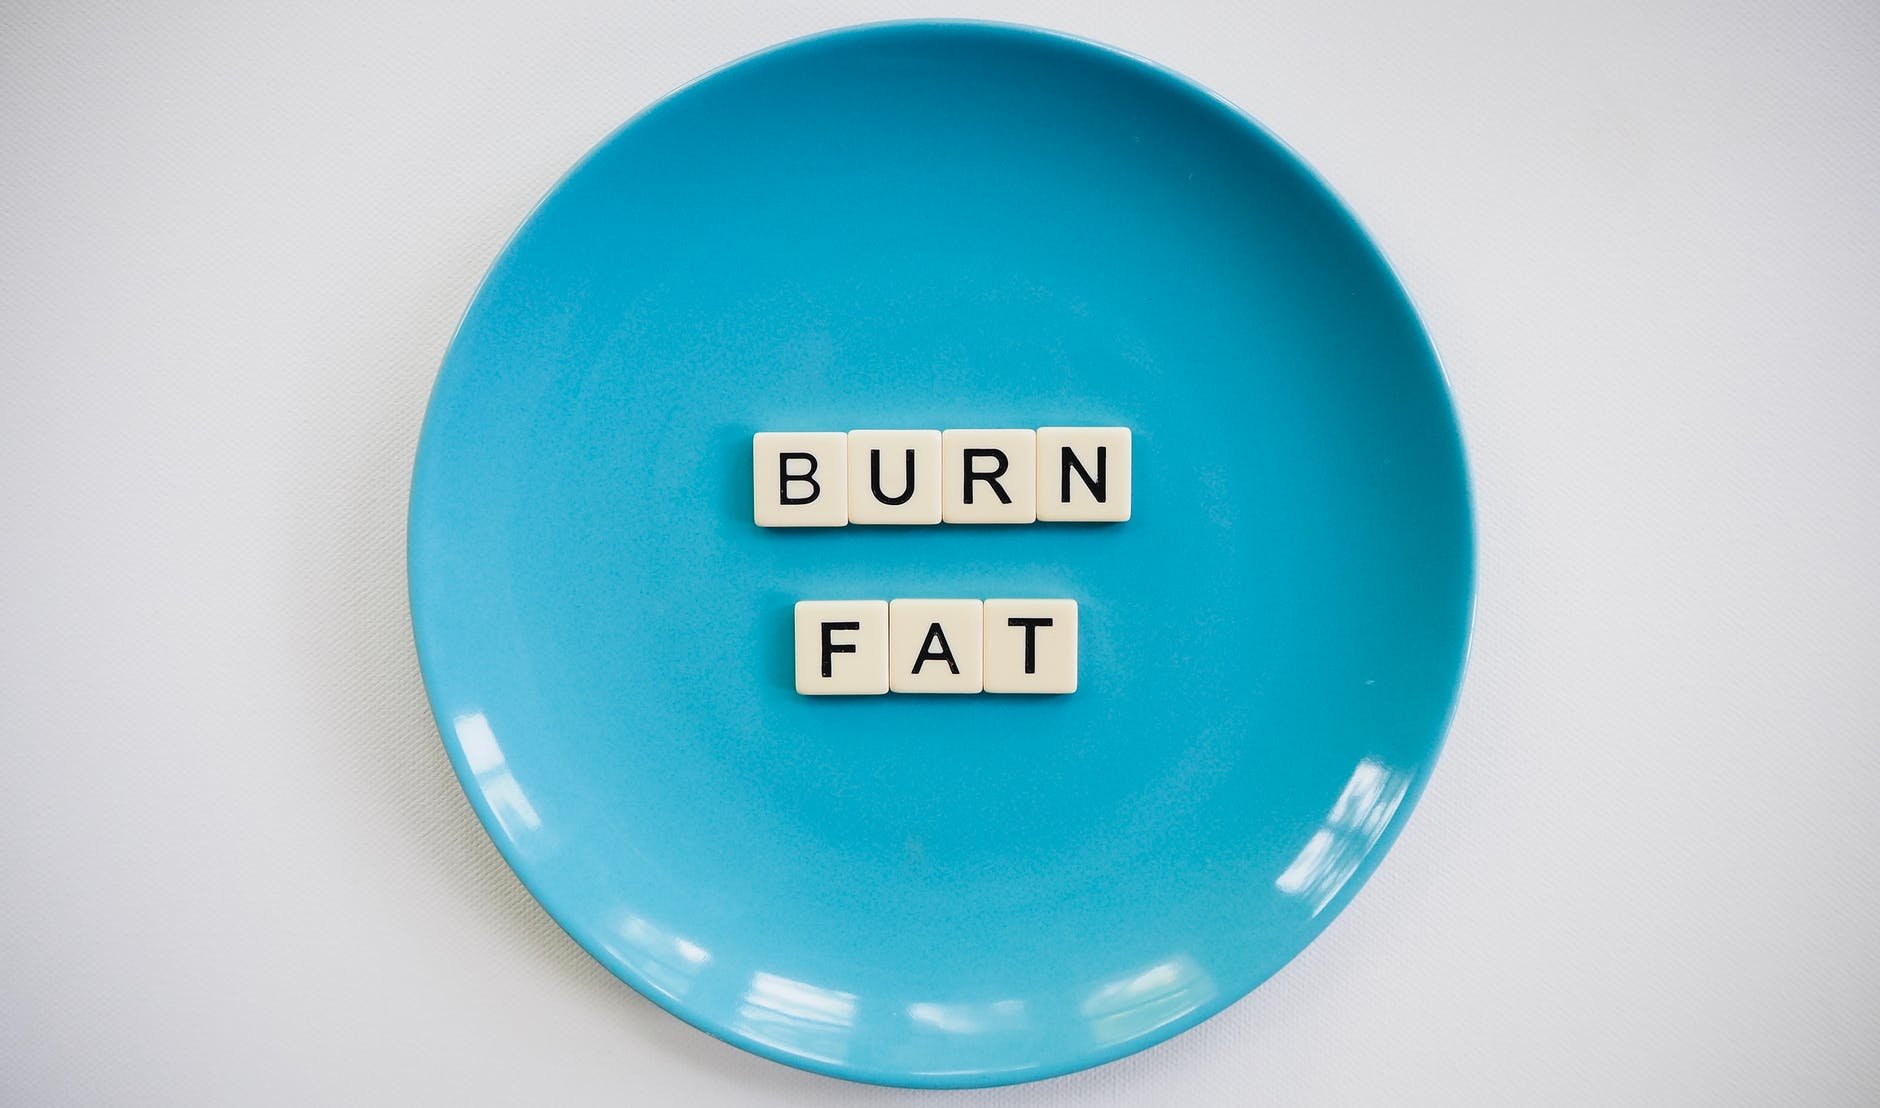 photo of a burn fat text on round blue plate. vet verbranden. bord.